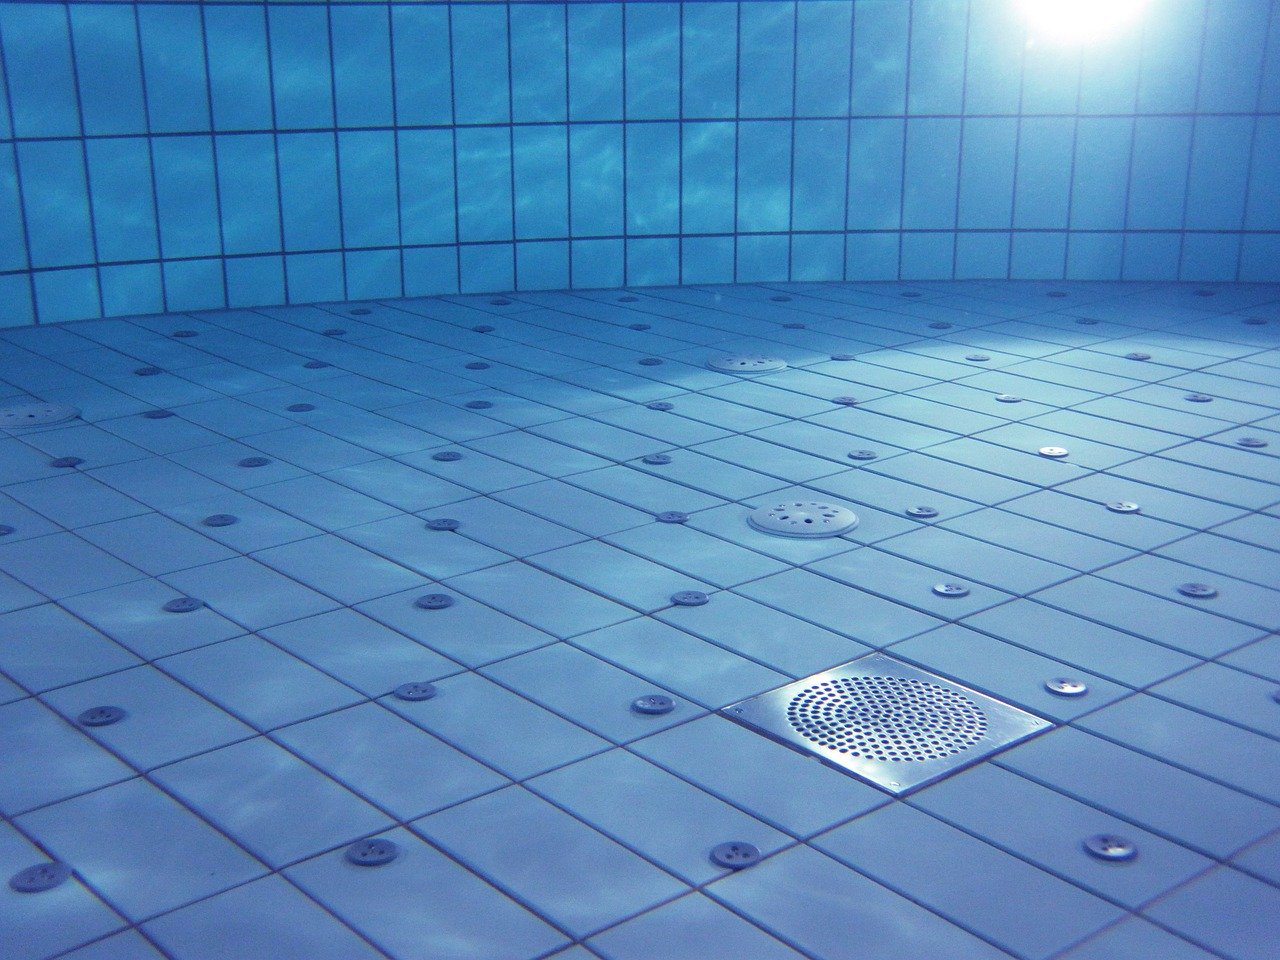 Photo of clear blue swimming pool water, tiles and drain.